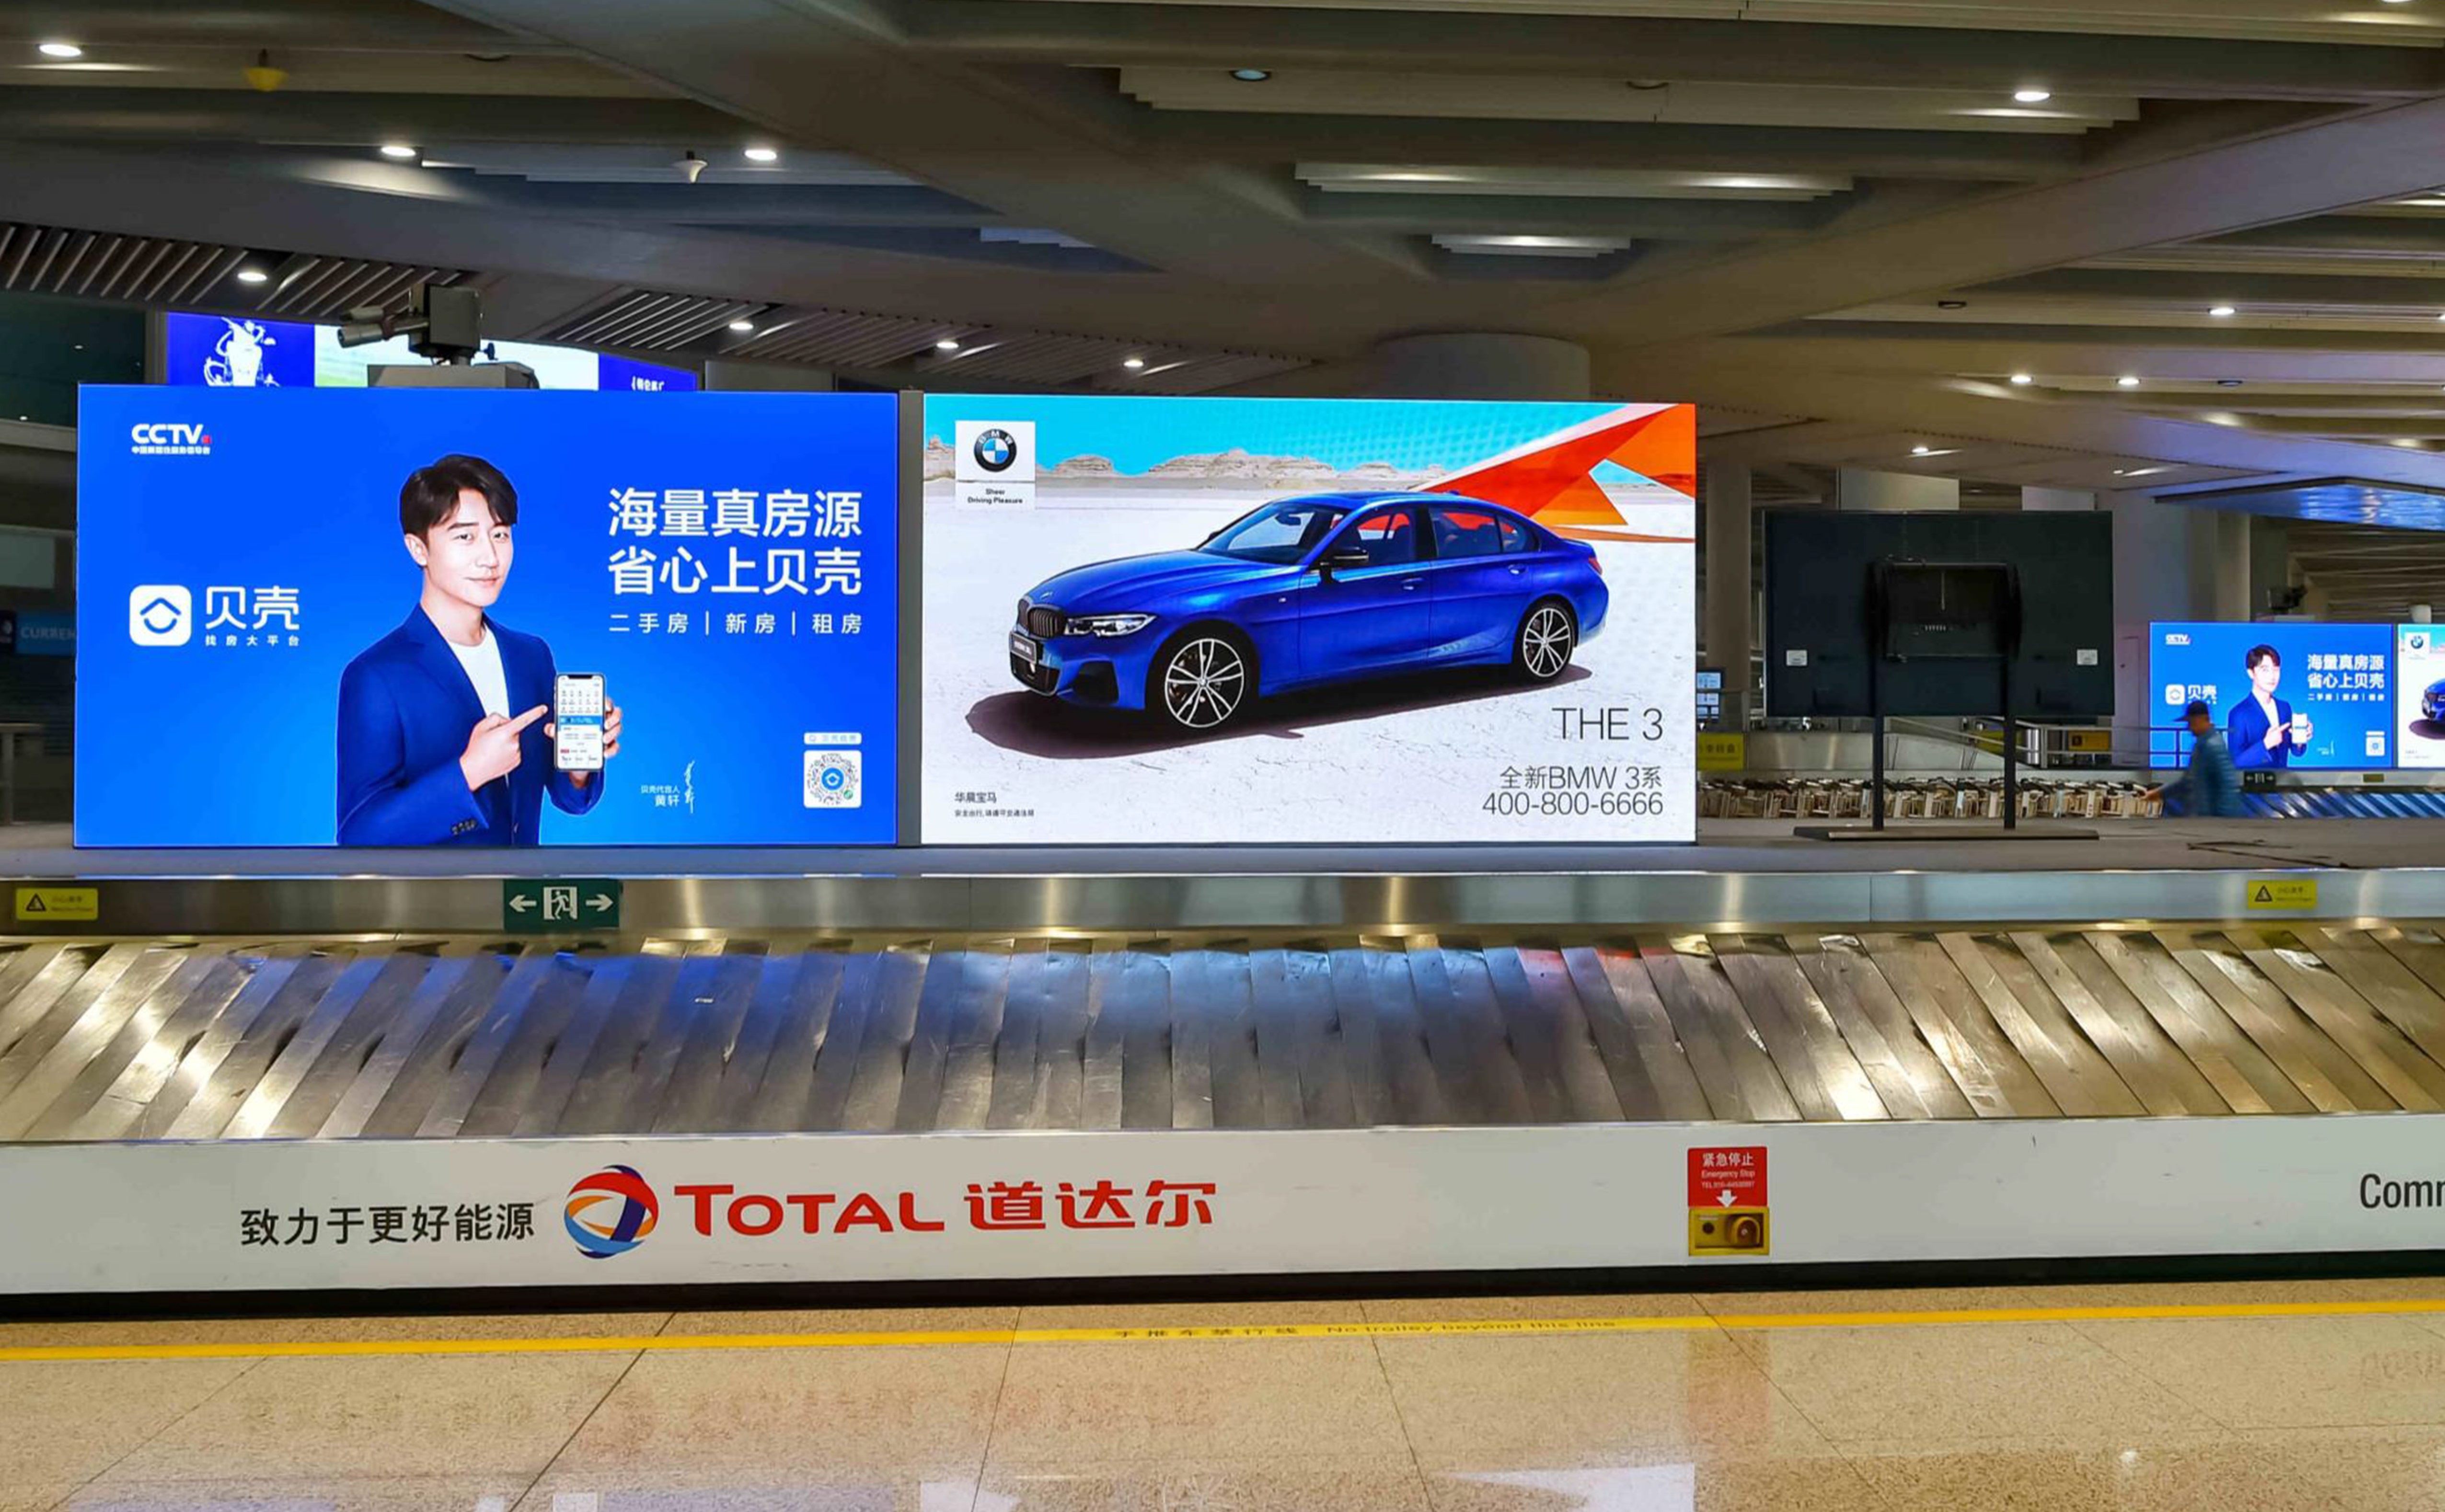 Capital Airport Luggage Hall Large Screen Advertising